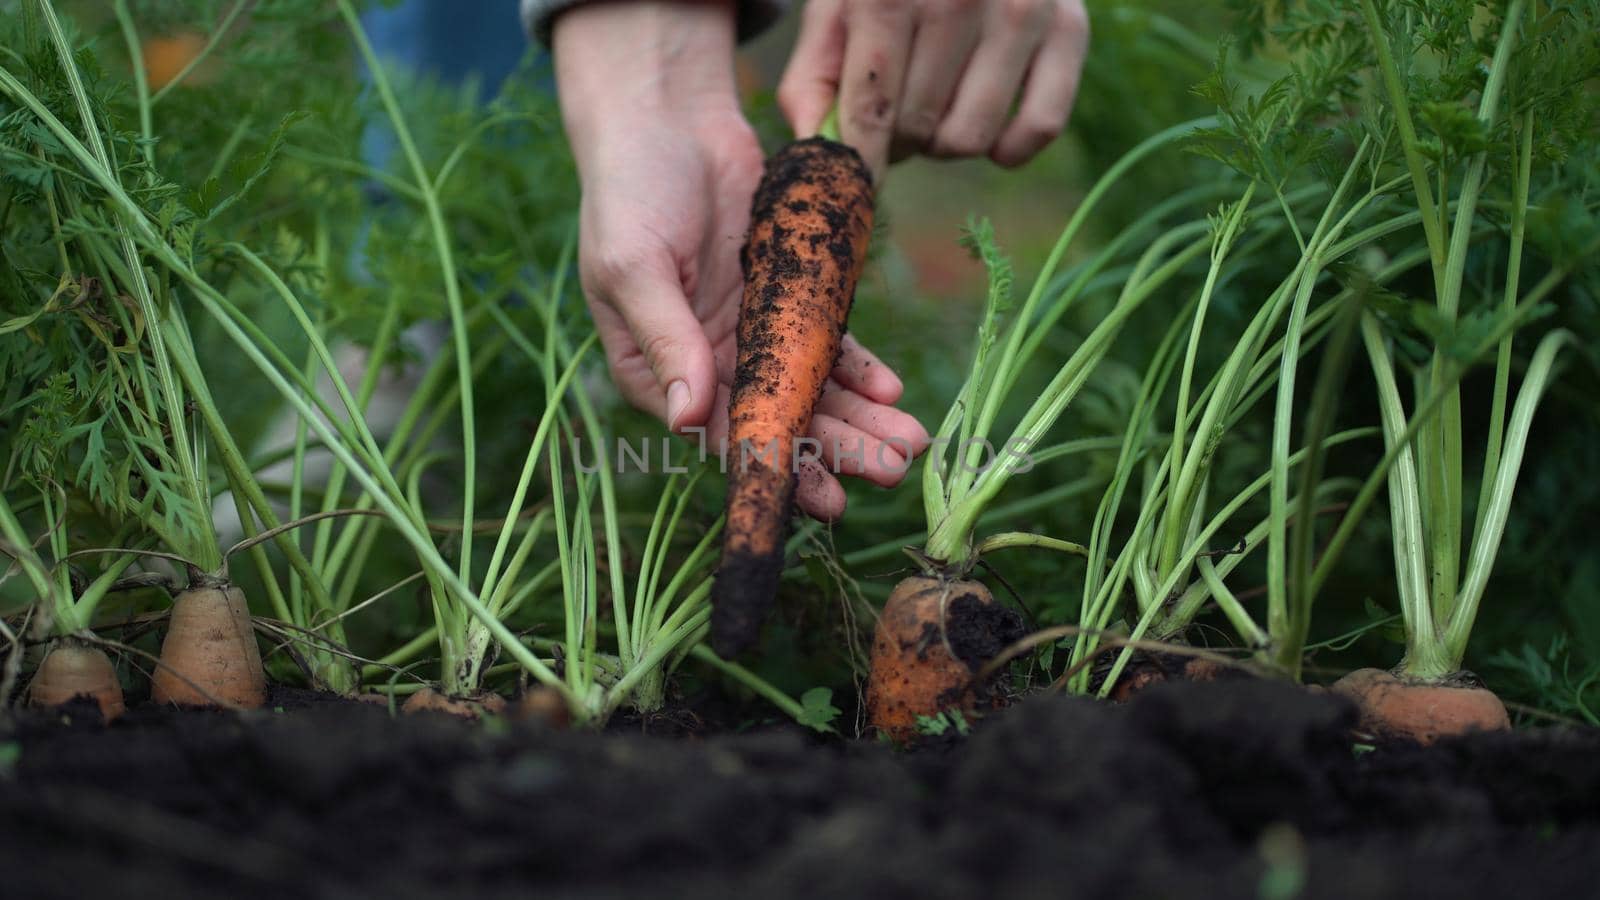 A woman takes a ripe carrot out of the ground and shows it to the camera.